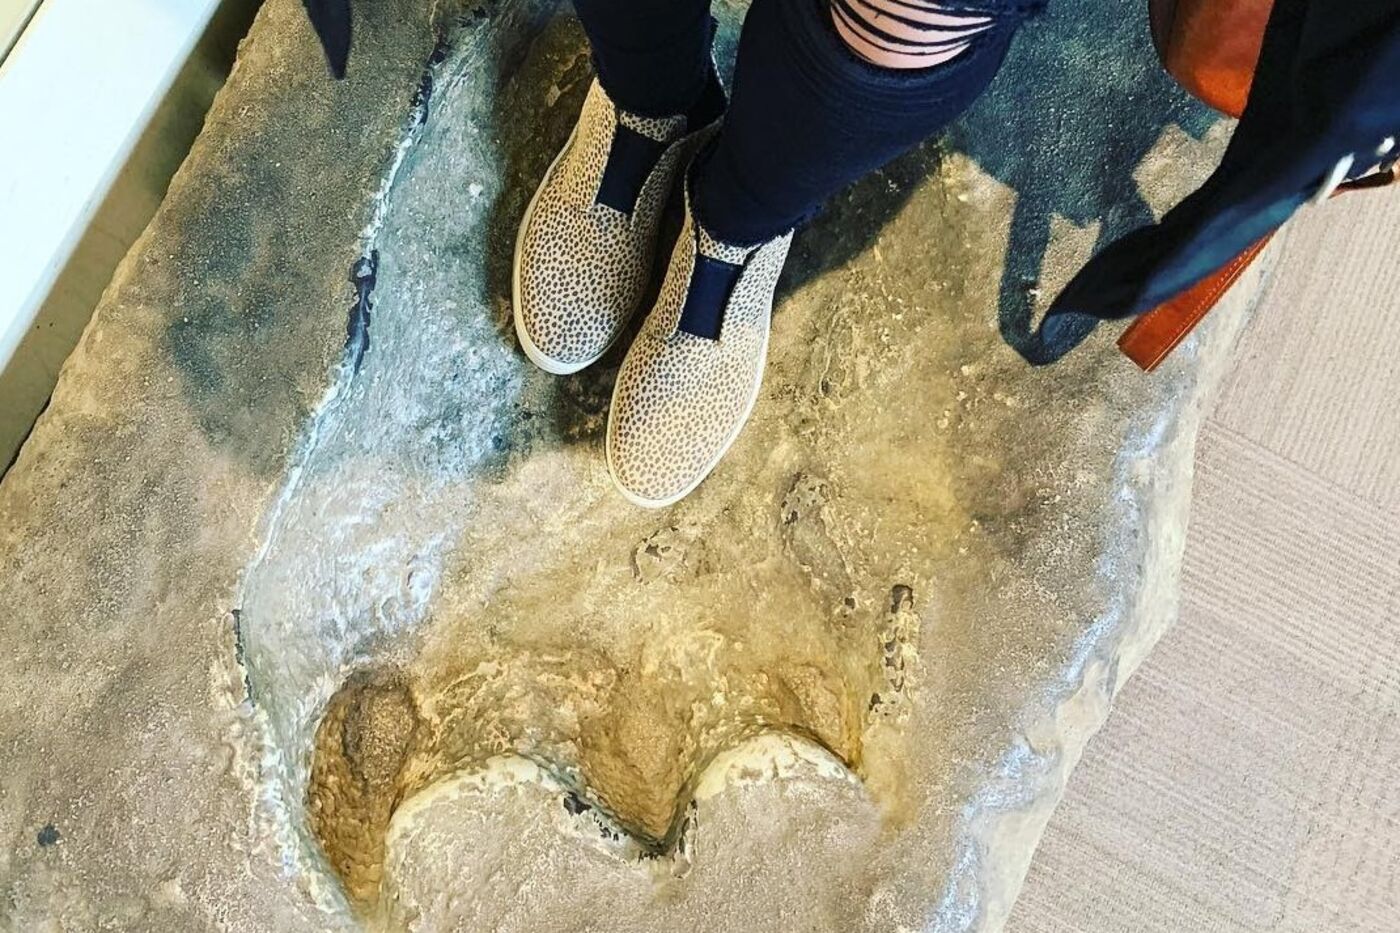 A museum visitor, from the knees down, standing in a giant dinosaur footprint model.